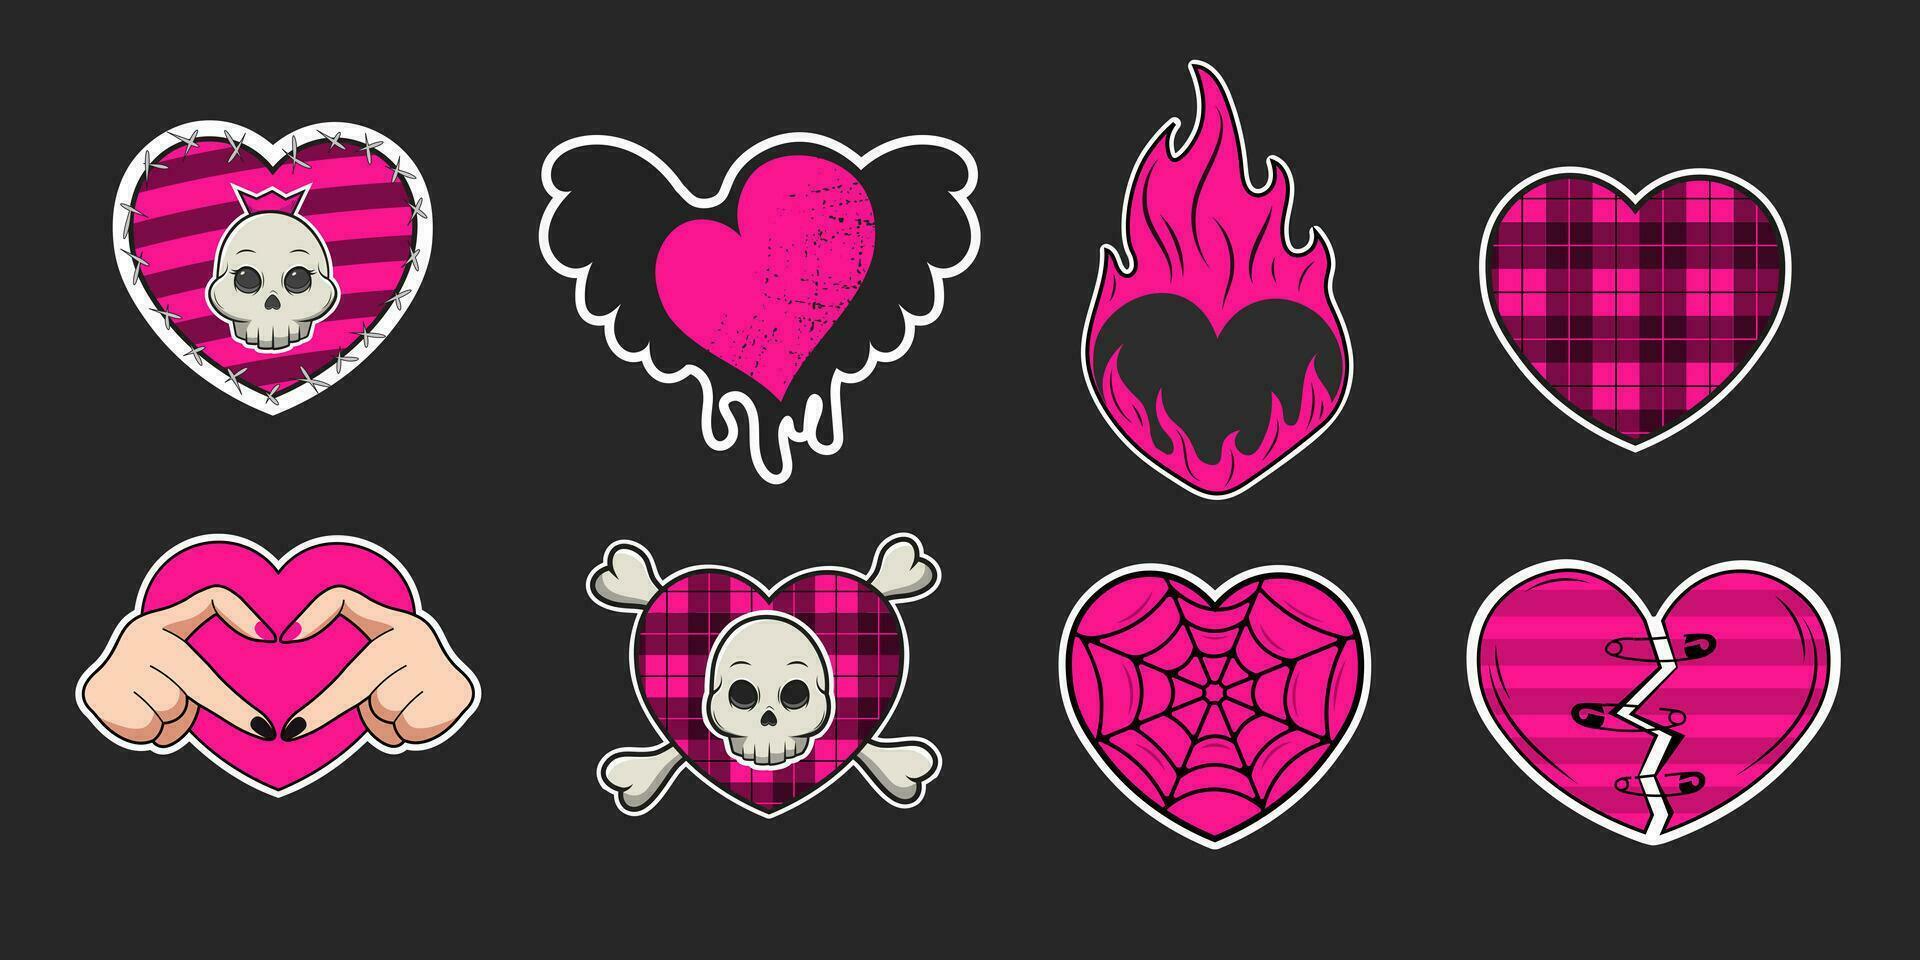 Set of trending emo stickers of hearts of the 2000s in black and acid pink colors. Hearts with skulls, with wings, heart made of fingers, broken heart with pins, with checkered pattern. vector